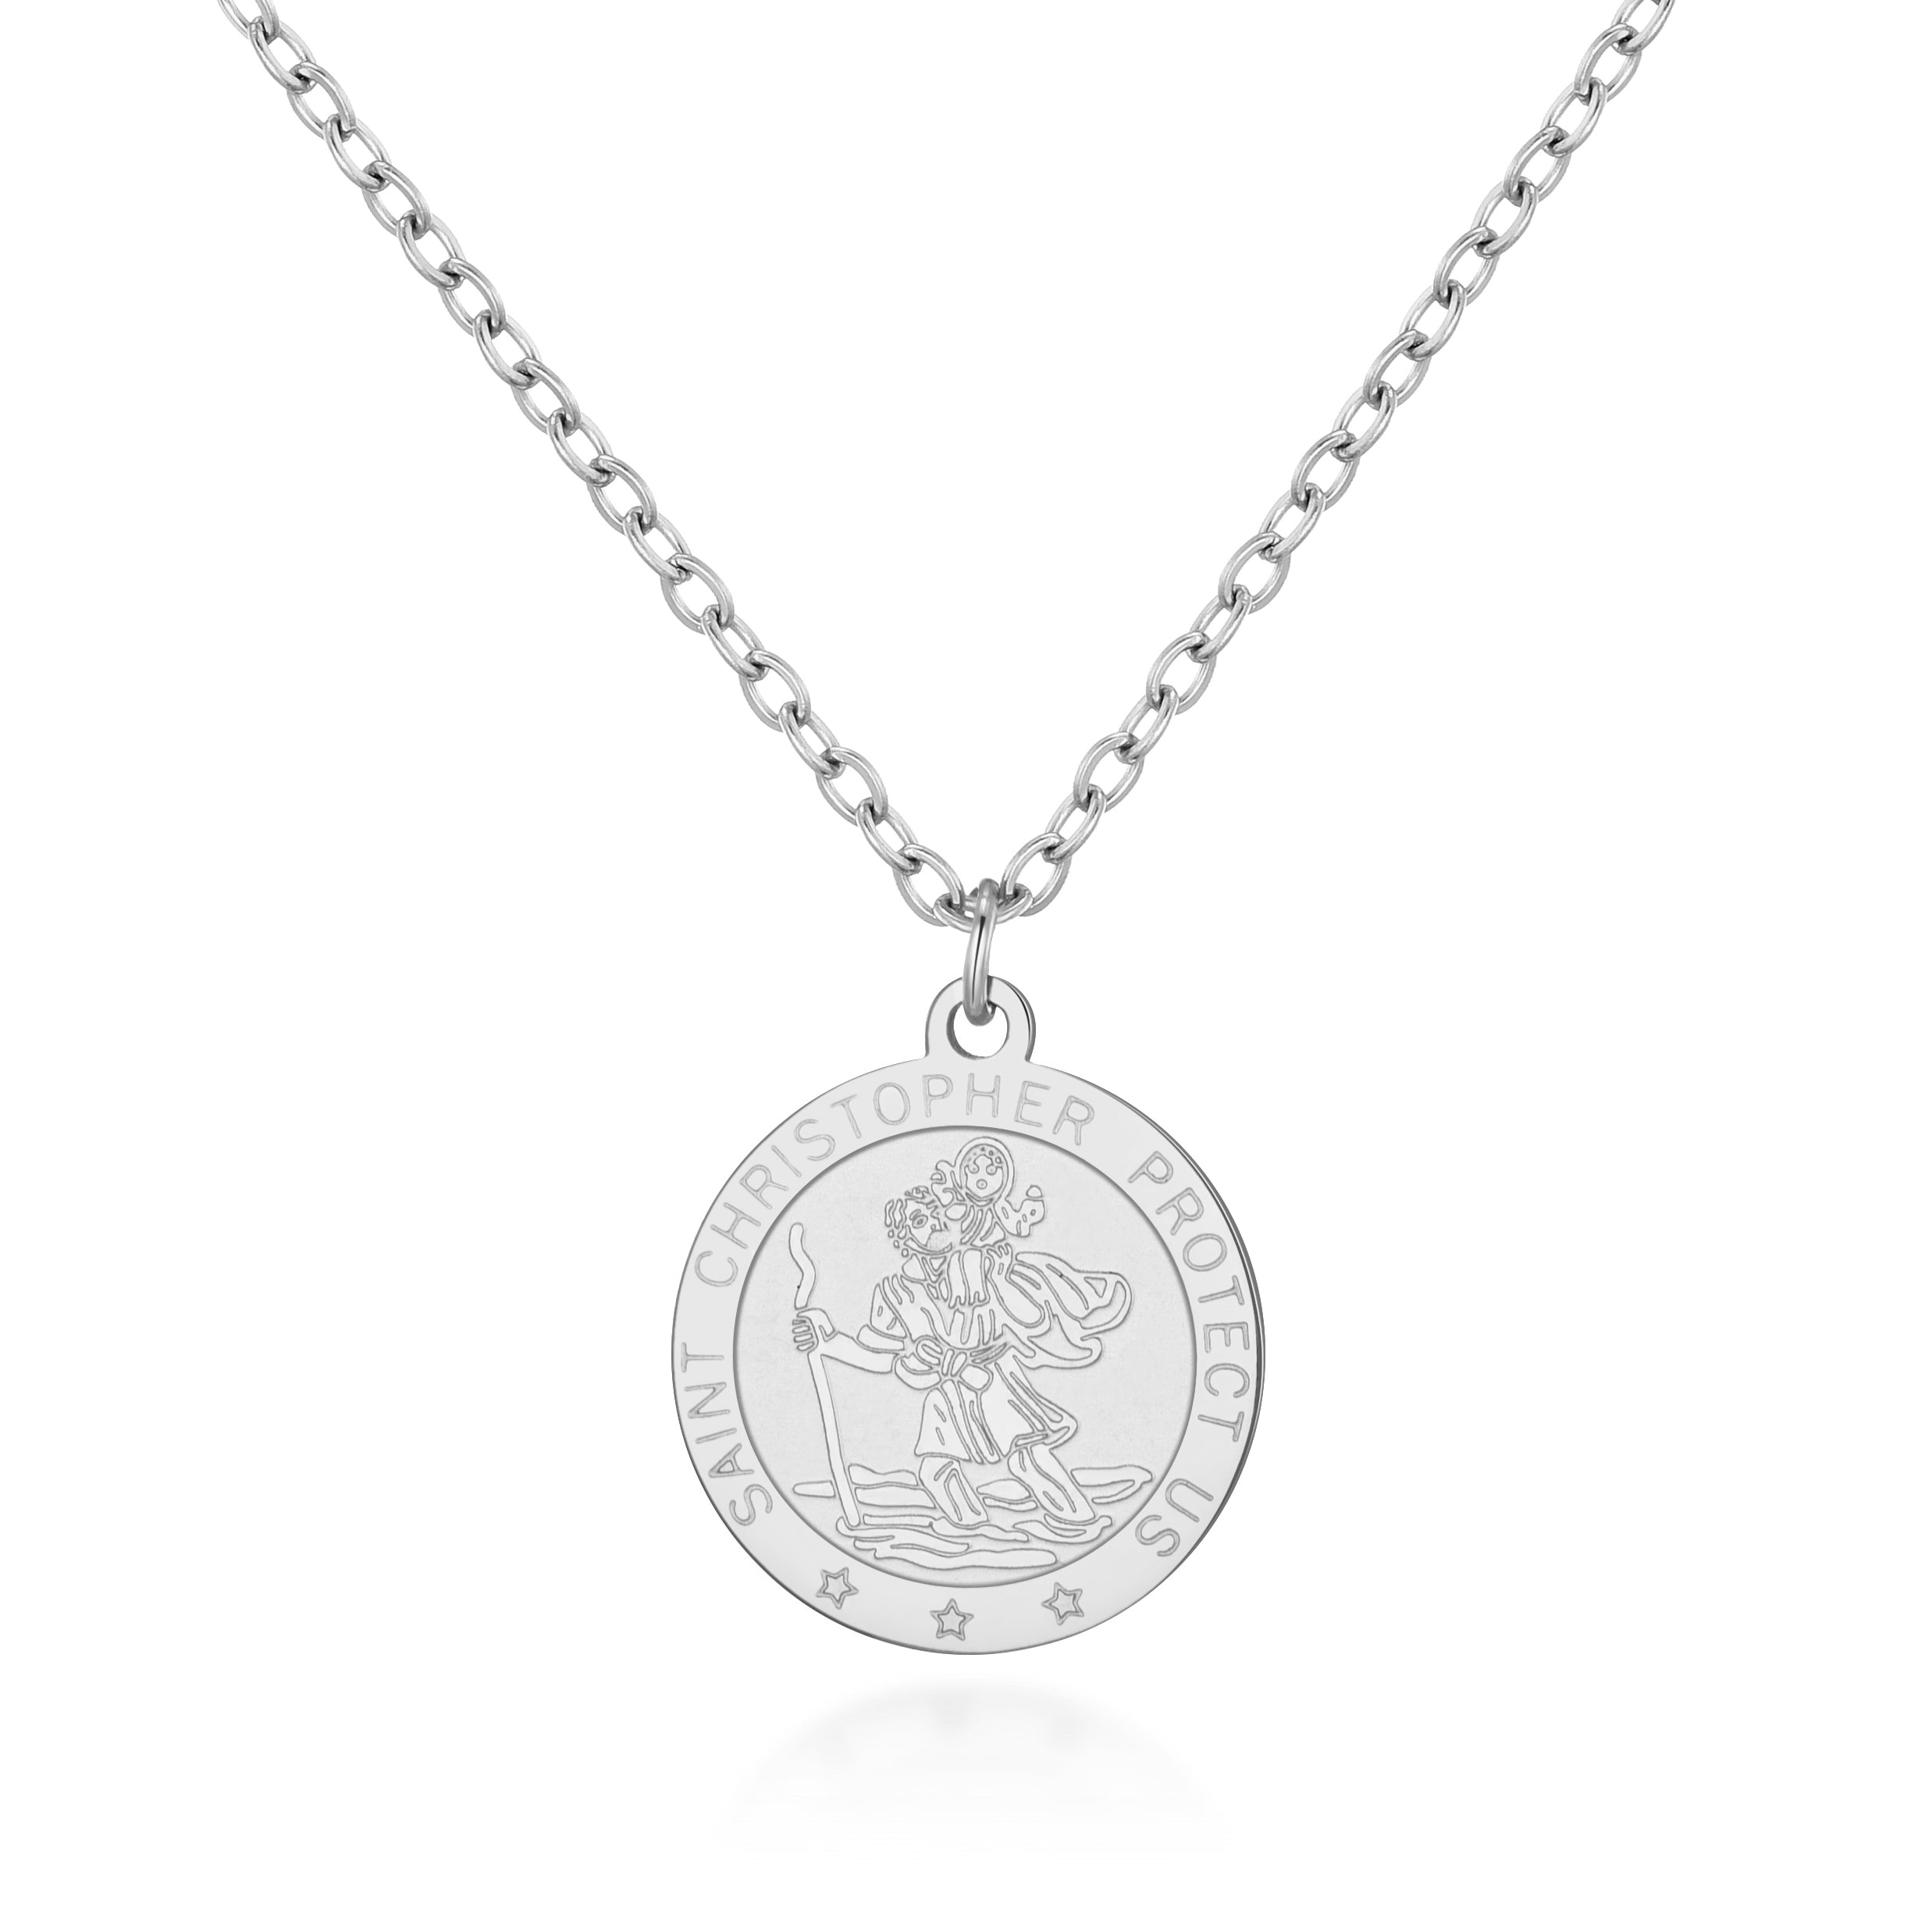 Men's Stainless Steel St Christopher Necklace by Philip Jones Jewellery